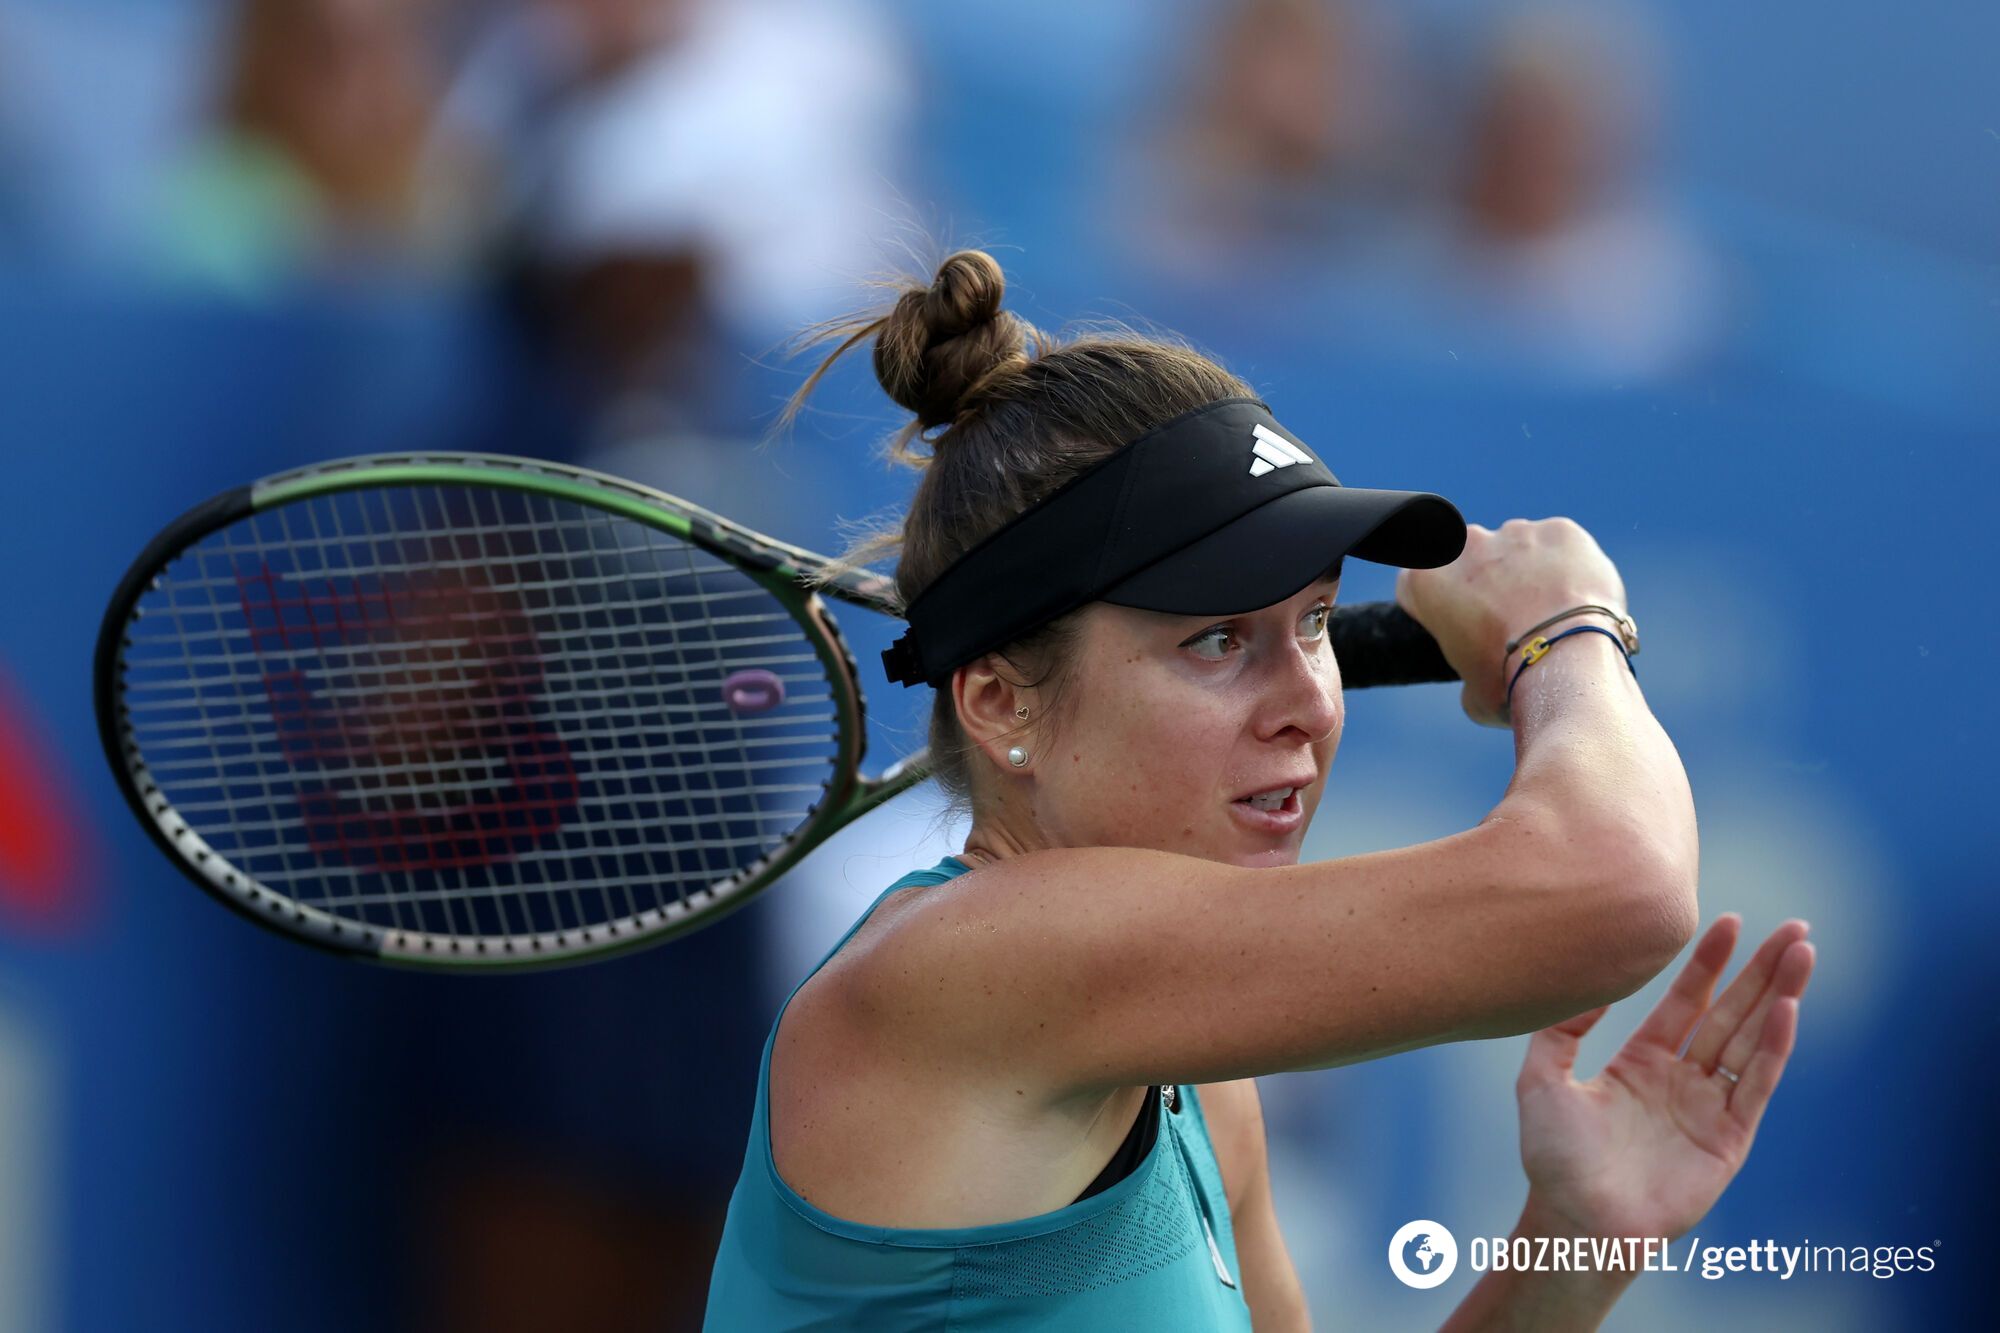 Svitolina defeated Russia's top player and refused to shake hands with her after her victory at the U.S. tournament